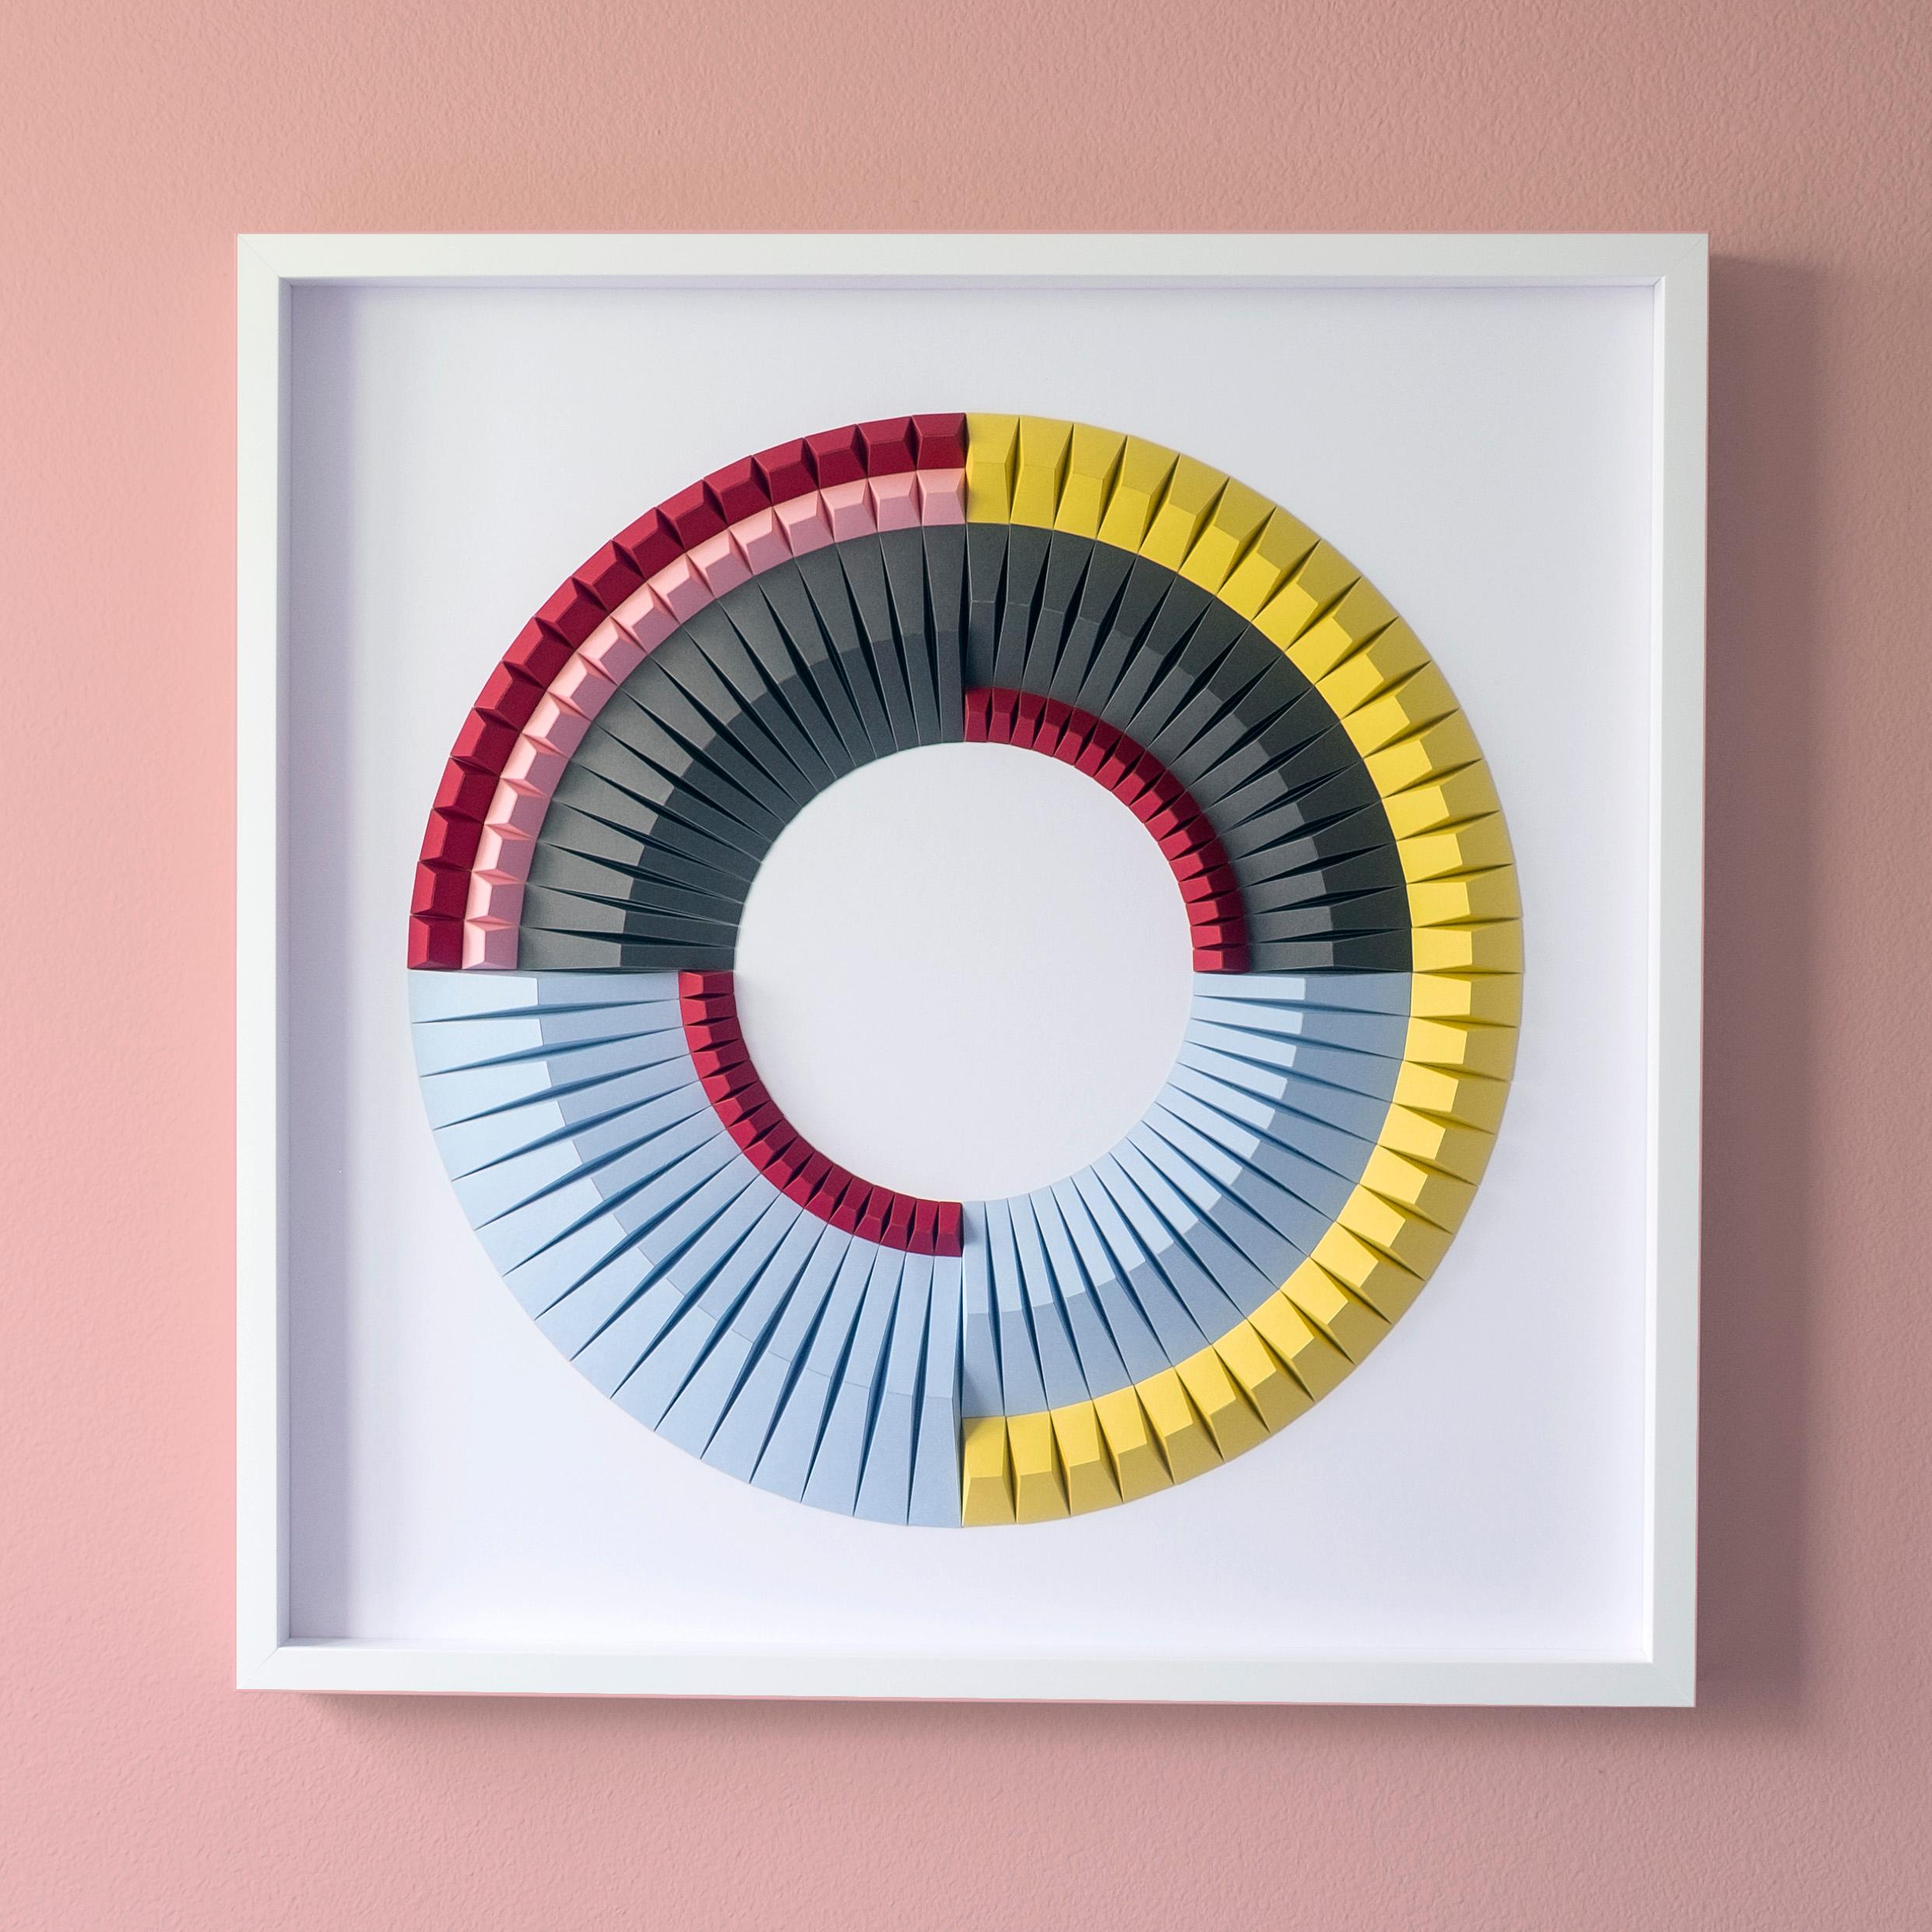 This beautiful geometric abstract wall sculpture is made out of colored laser cut paper that was hand folded by Yossi Ben Abu. It comes in white wooden frame and a non glare museum glass.
